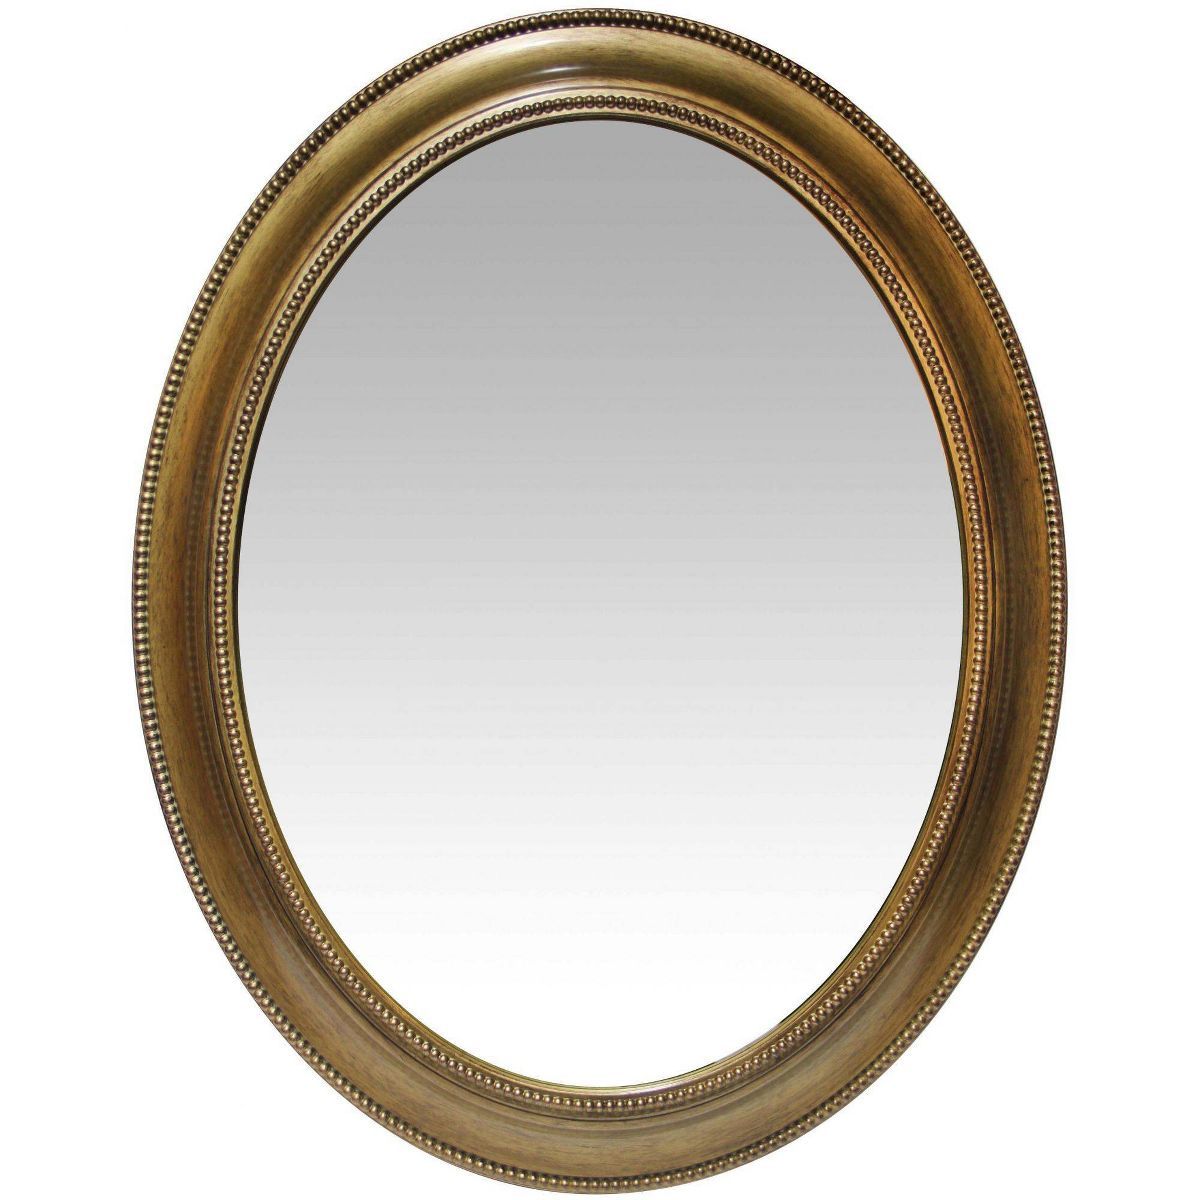 30" Sonore Oval Wall Mirror Antique Gold - Infinity Instruments | Target